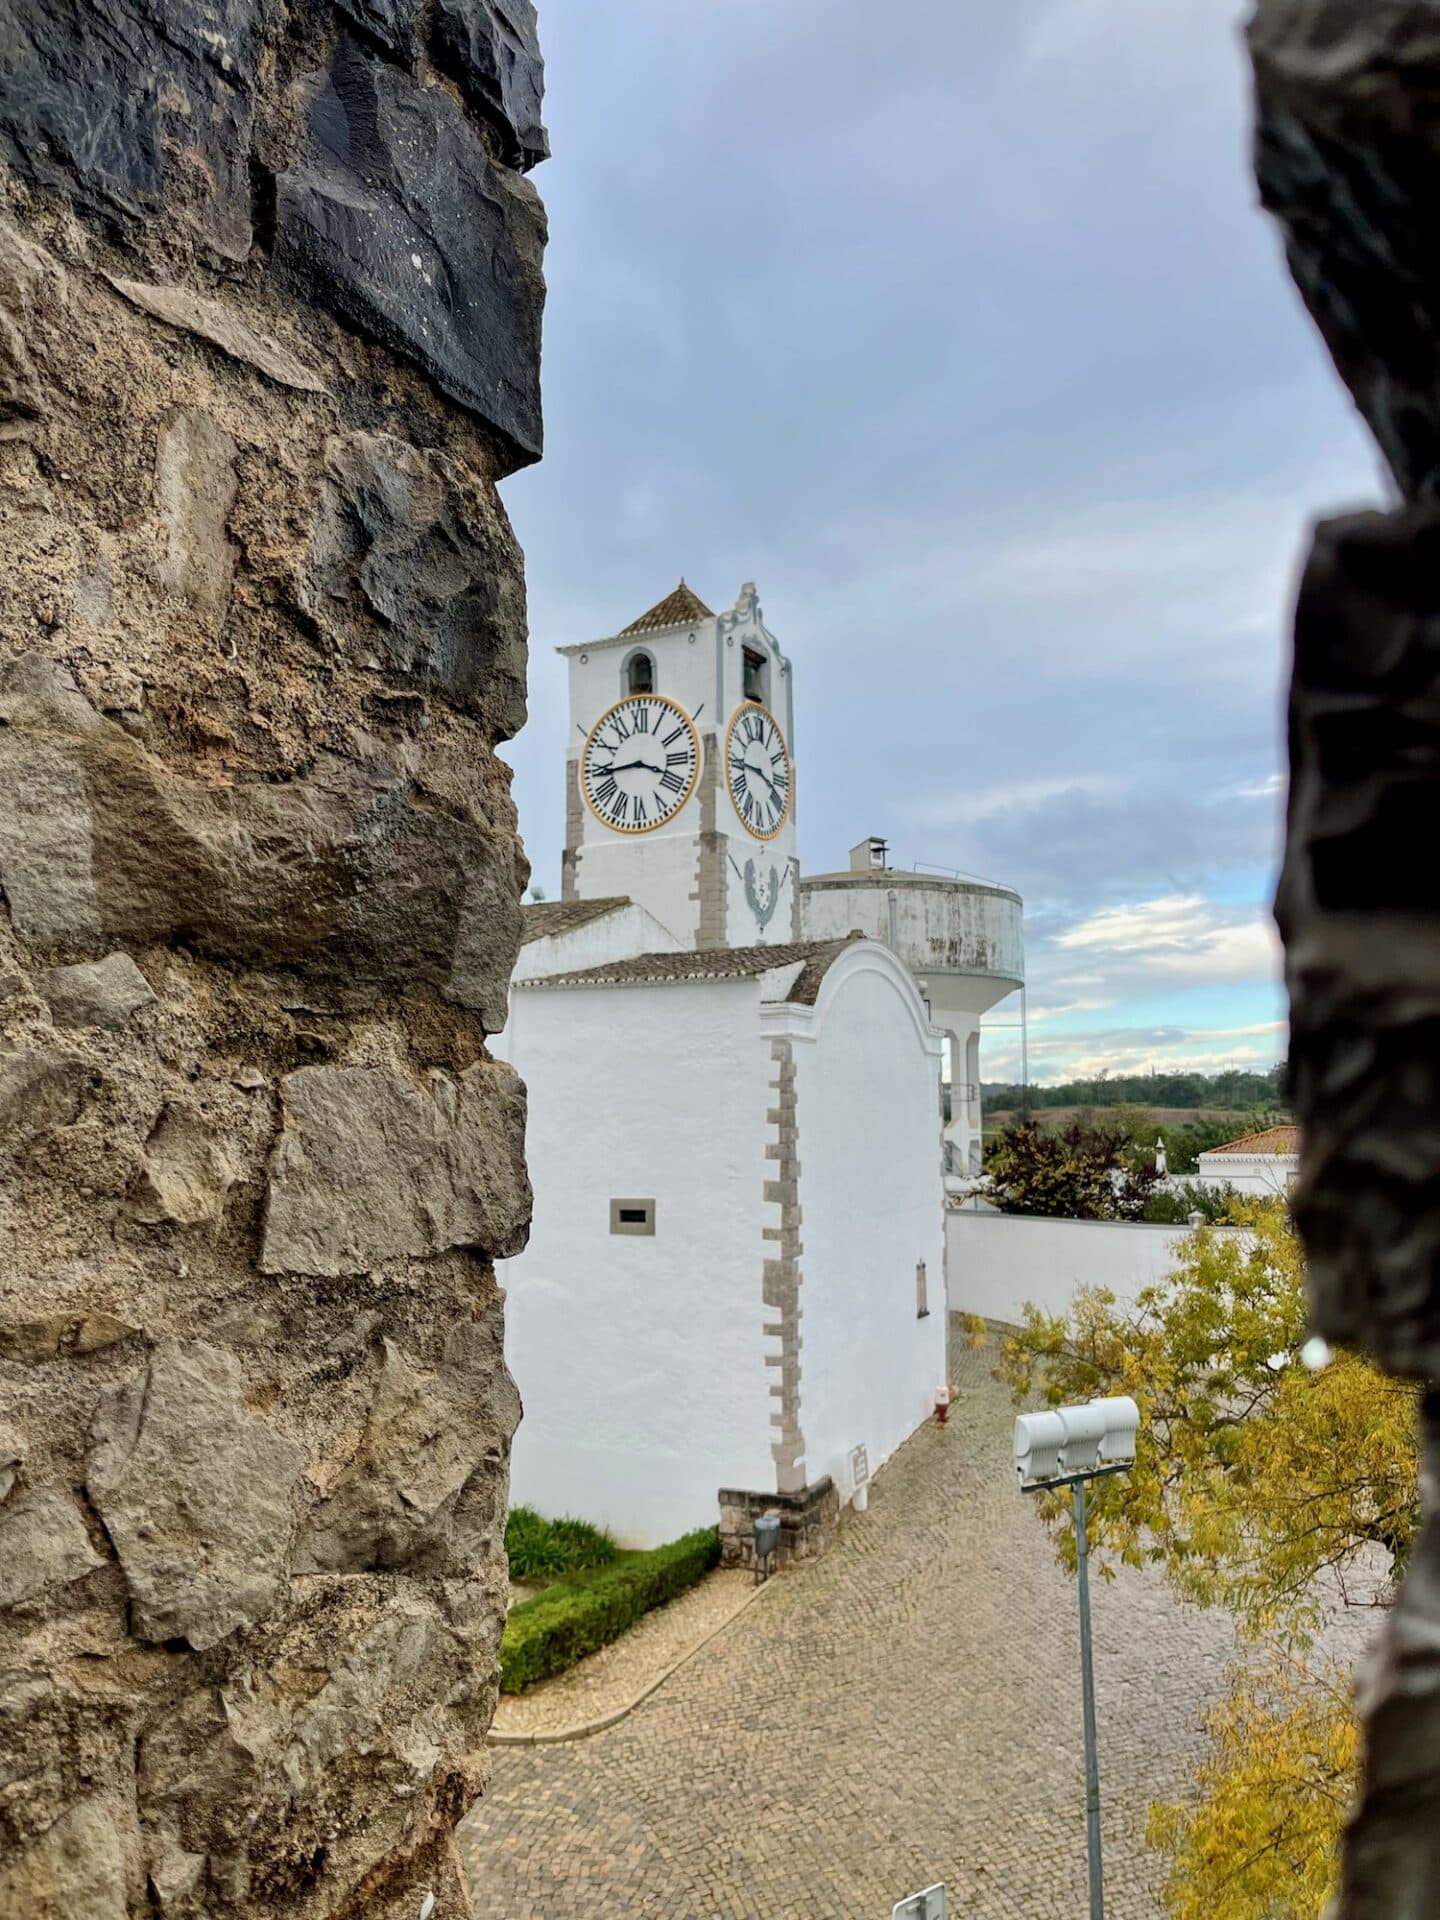 A historic white clock tower seen through the battlements of a castle wall, blending the old architecture with a view of modern street lamps in Tavira.